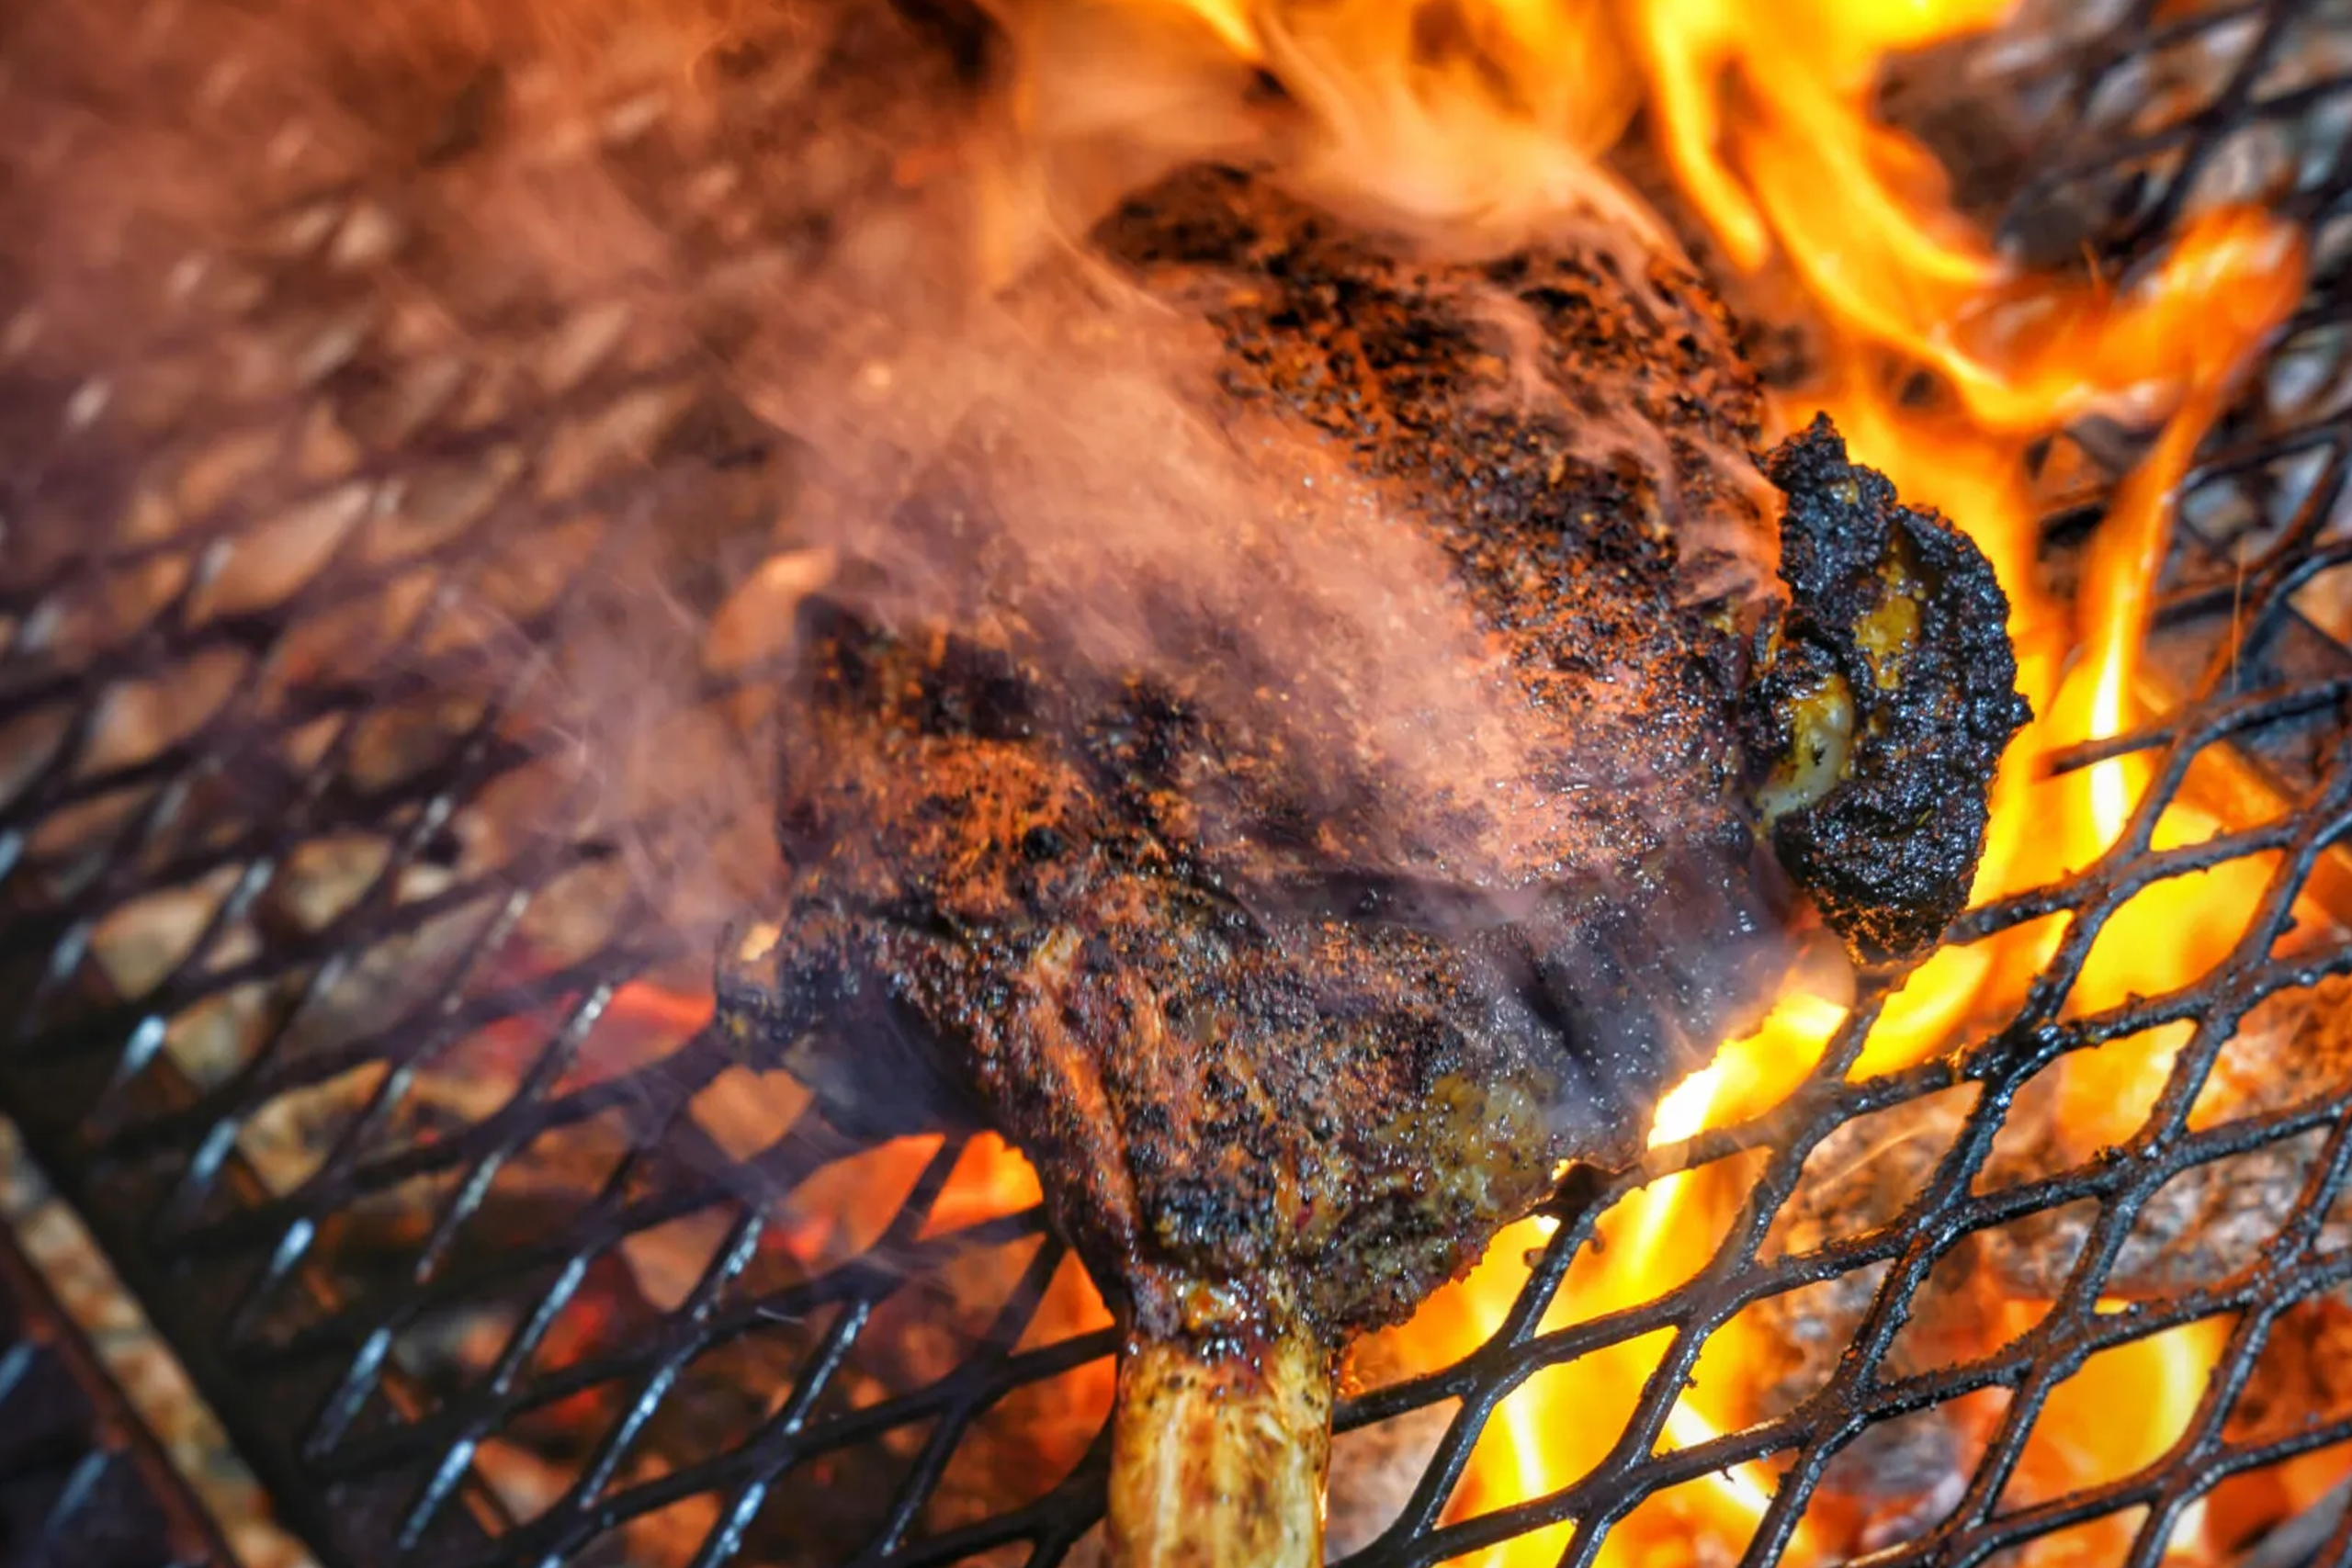 Elevate your grill game this summer with this beauty: Steak